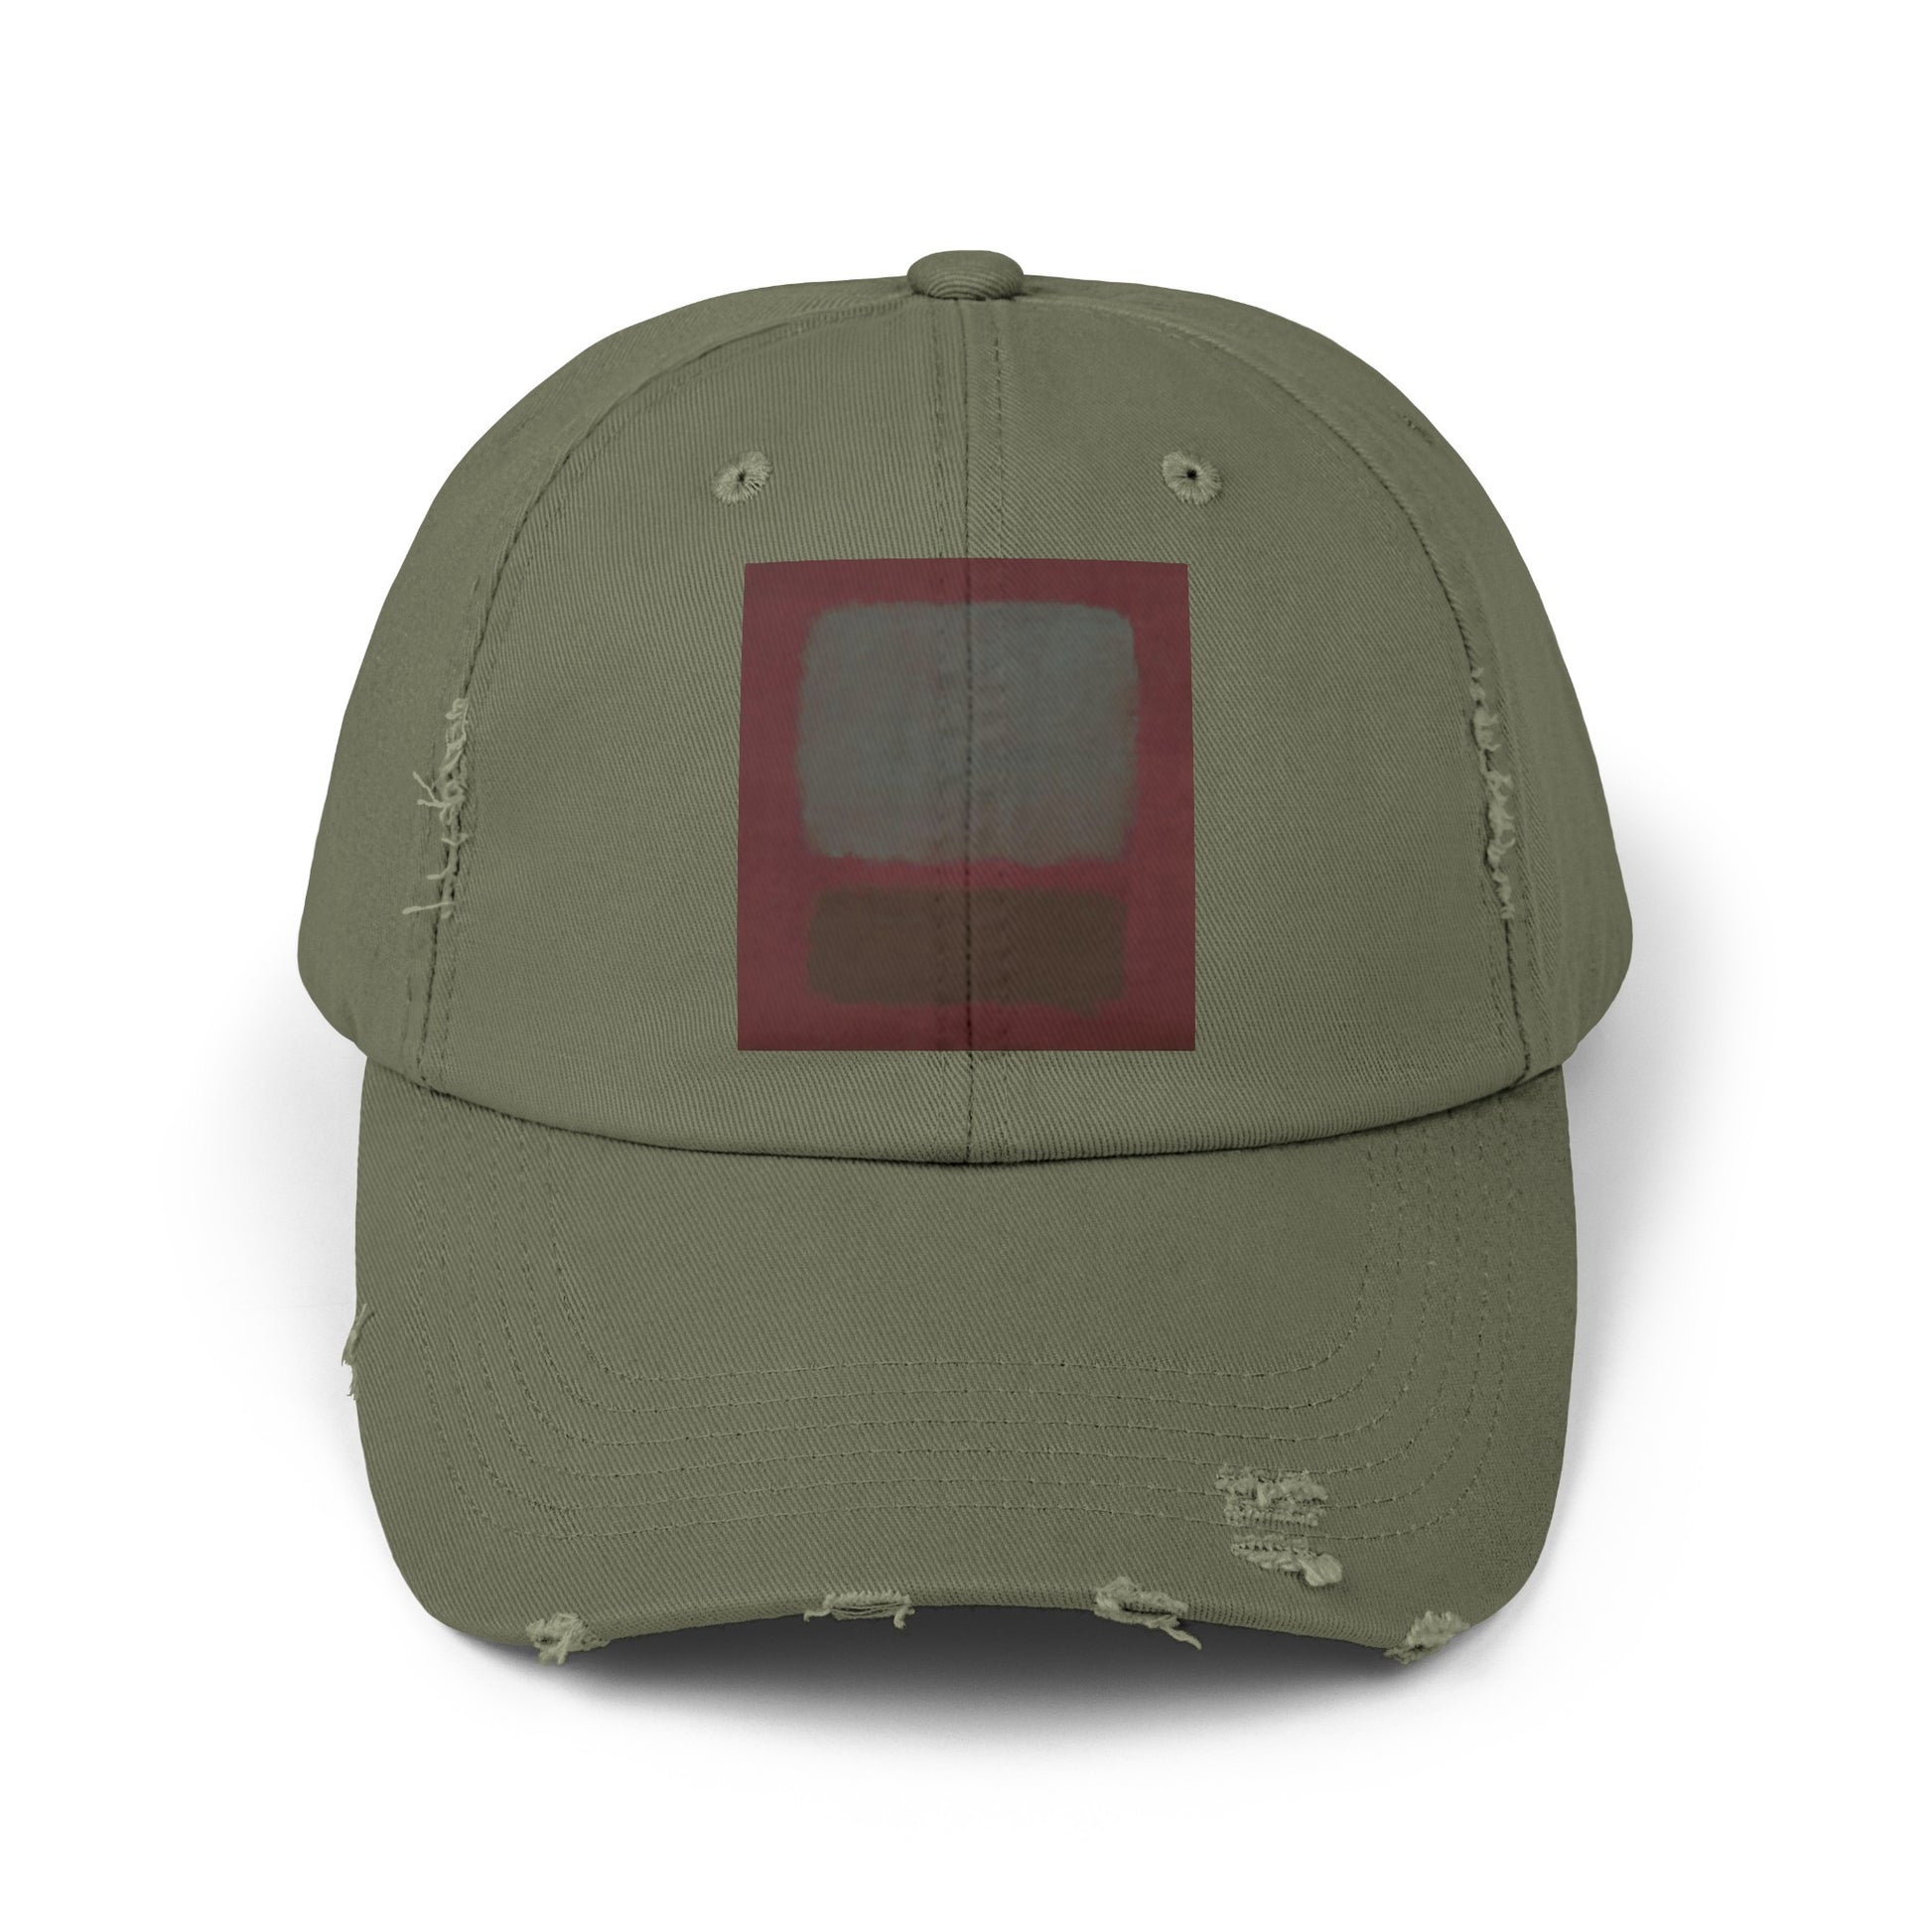 a green hat with a red square on it